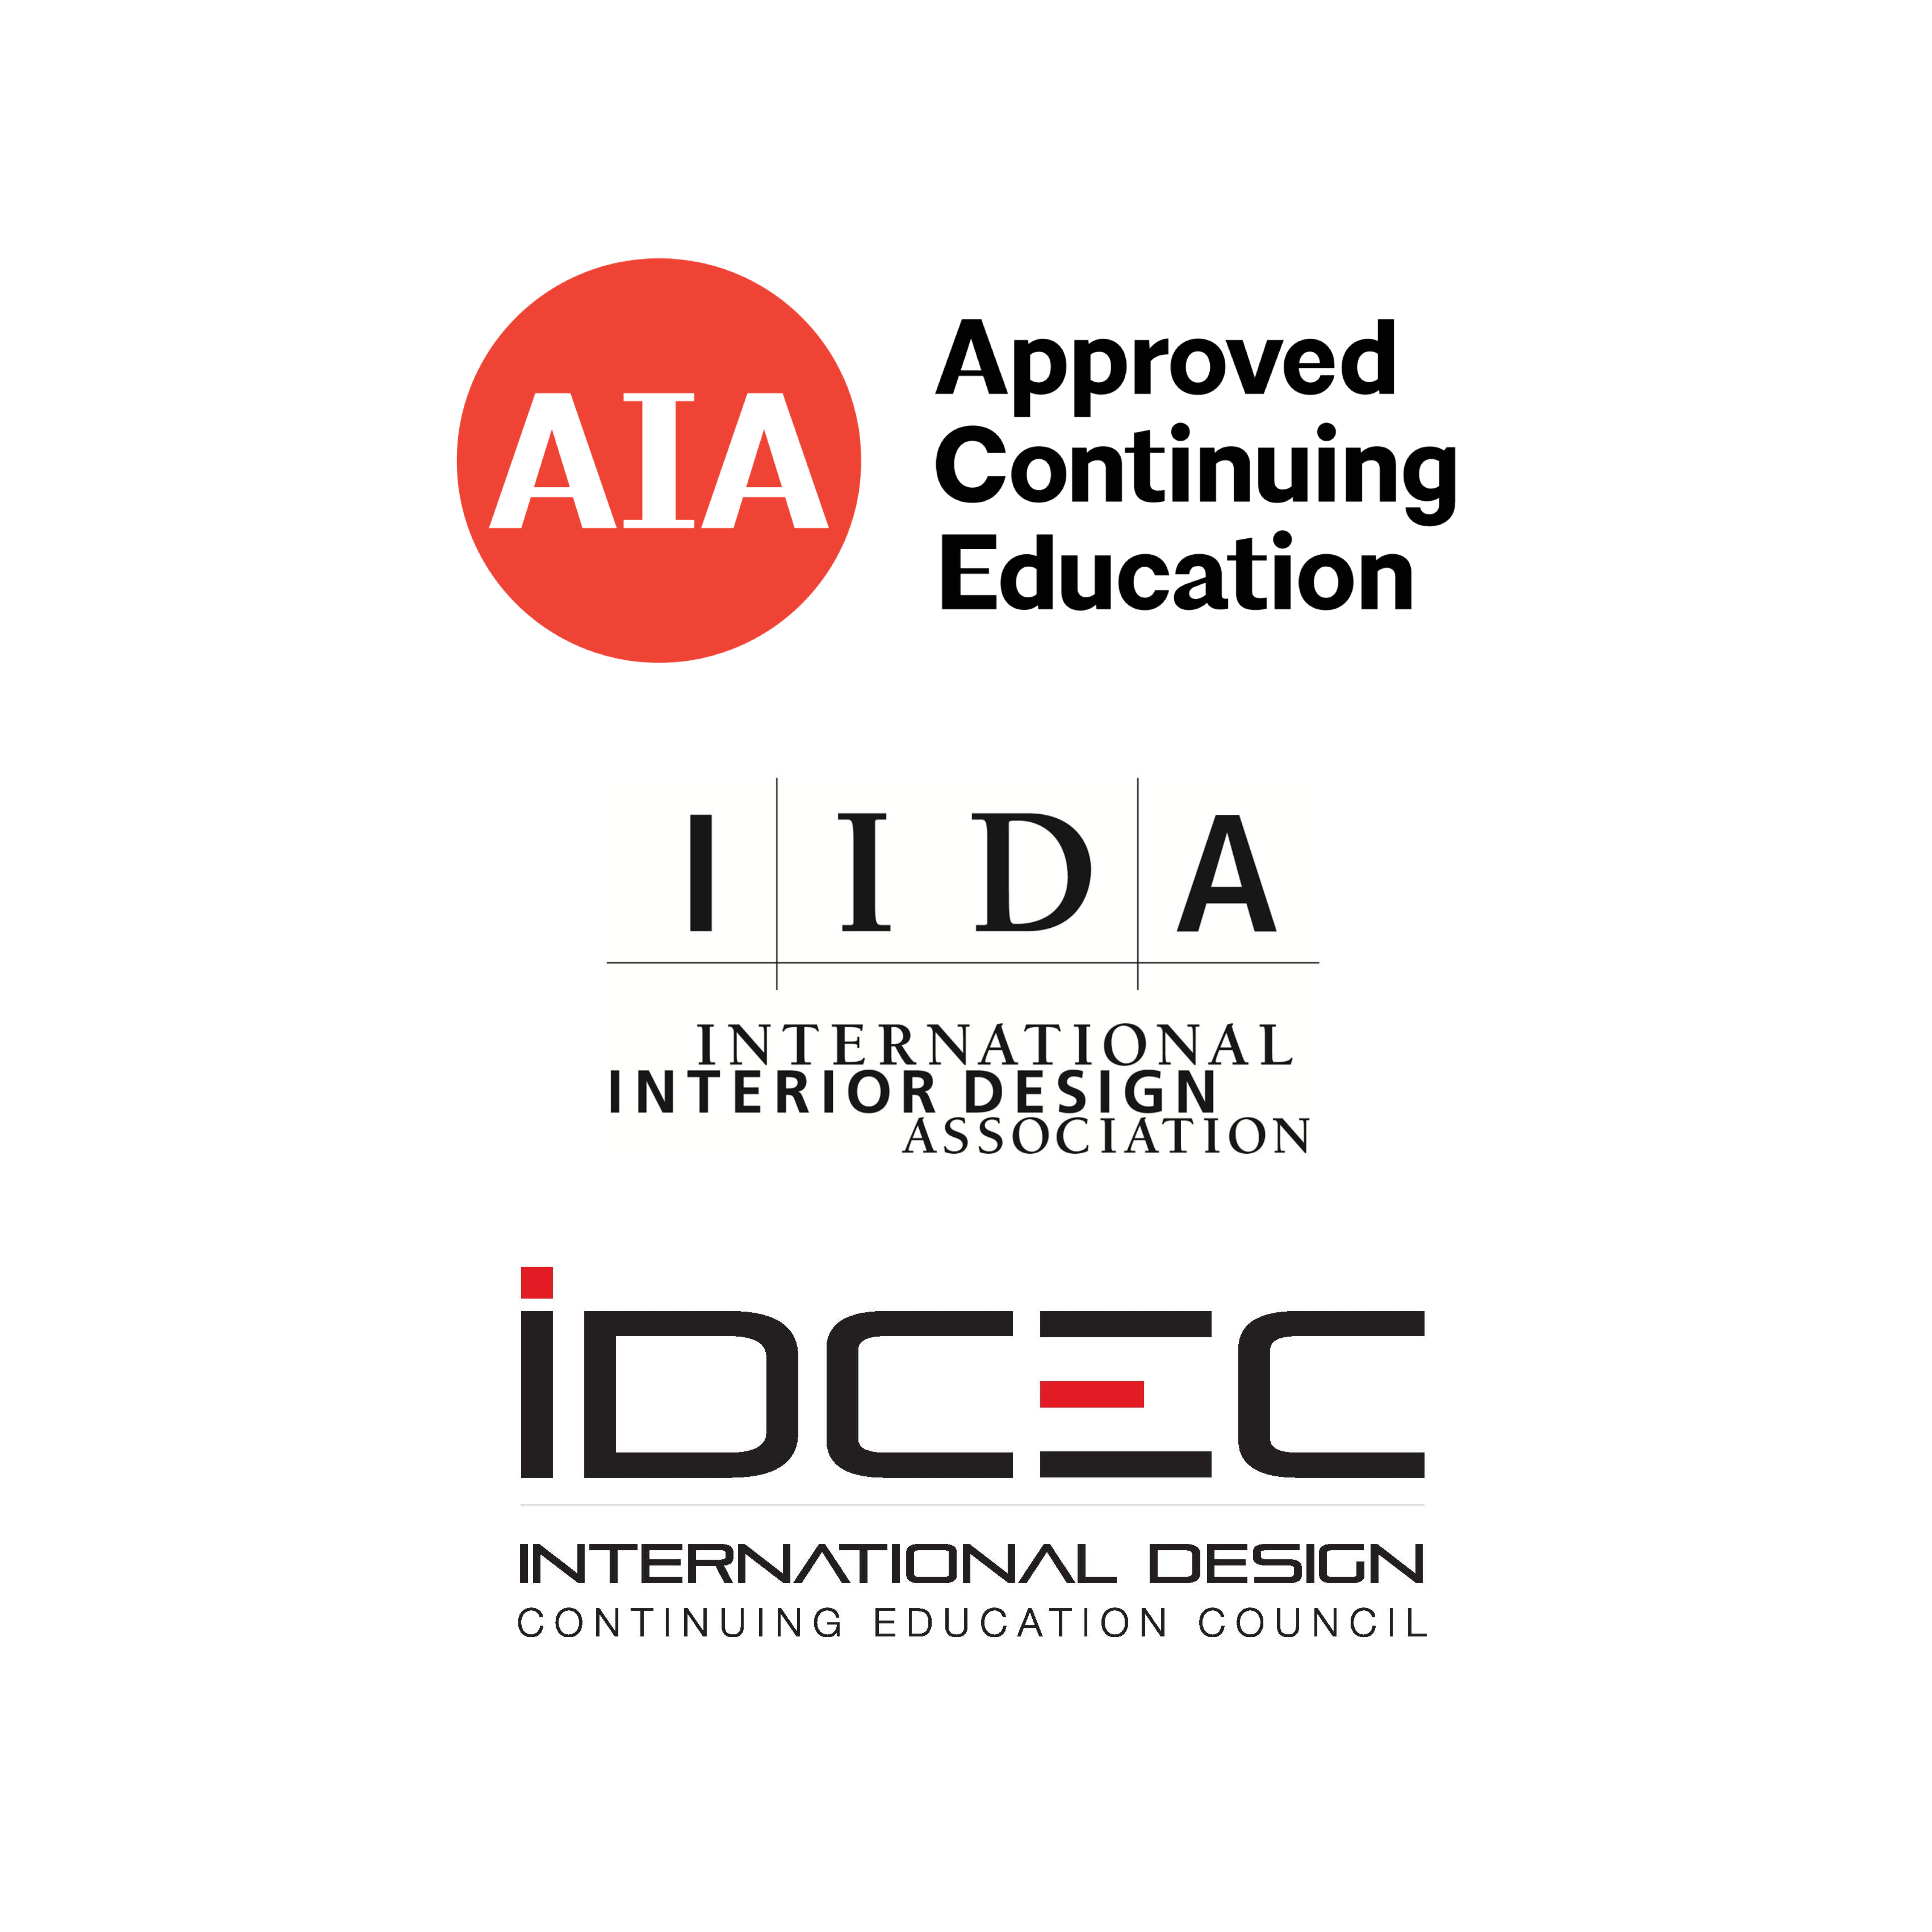 AIA and IDCEC